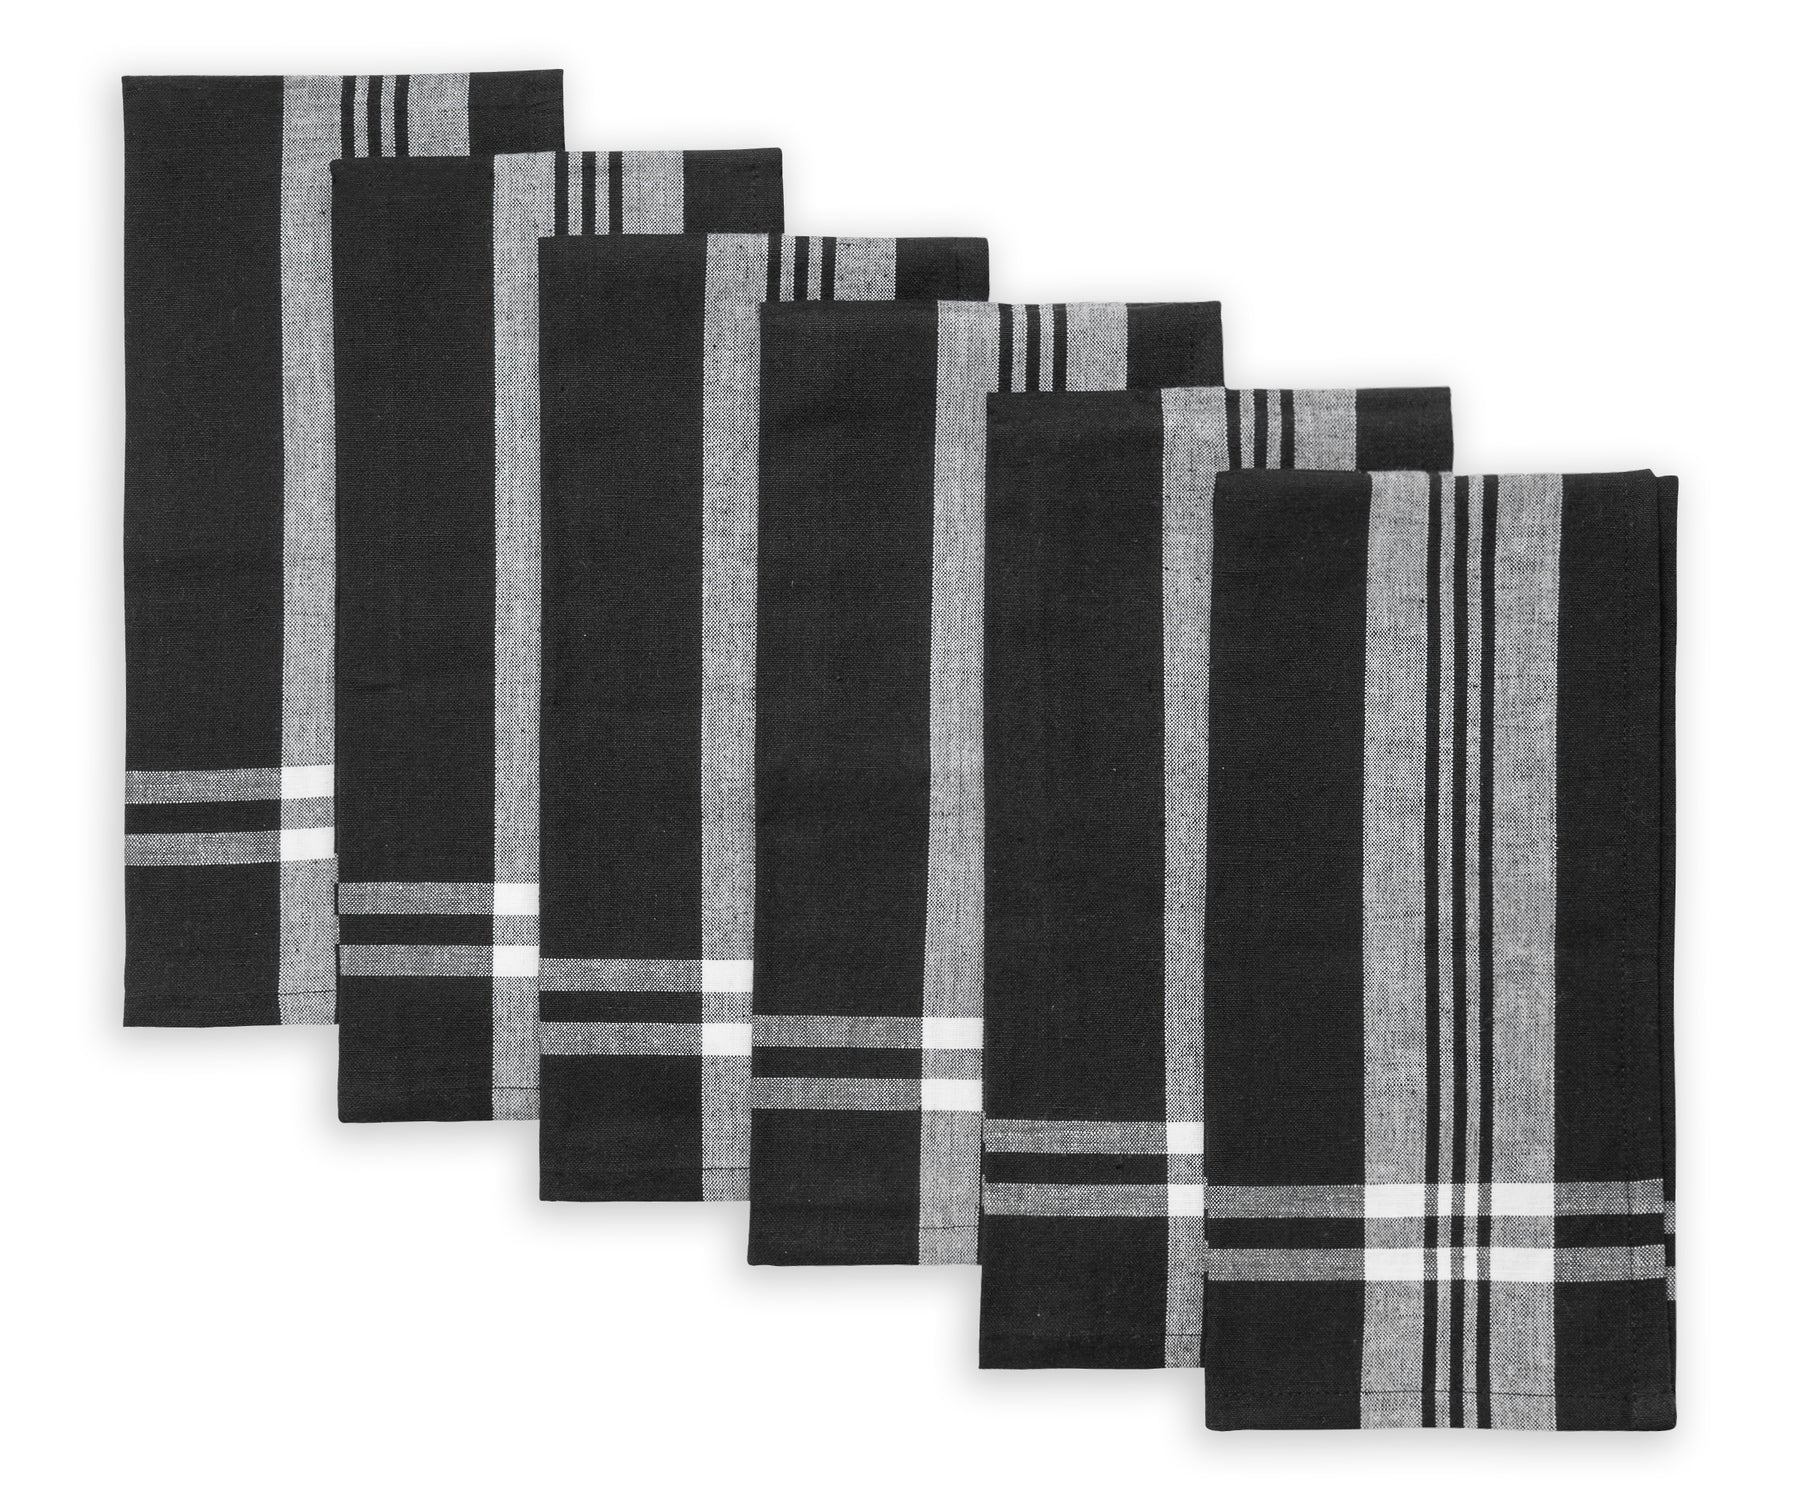 Hand Woven Hache Dish Towel with Dish Cloth | Black & White Stripes with  Black Border